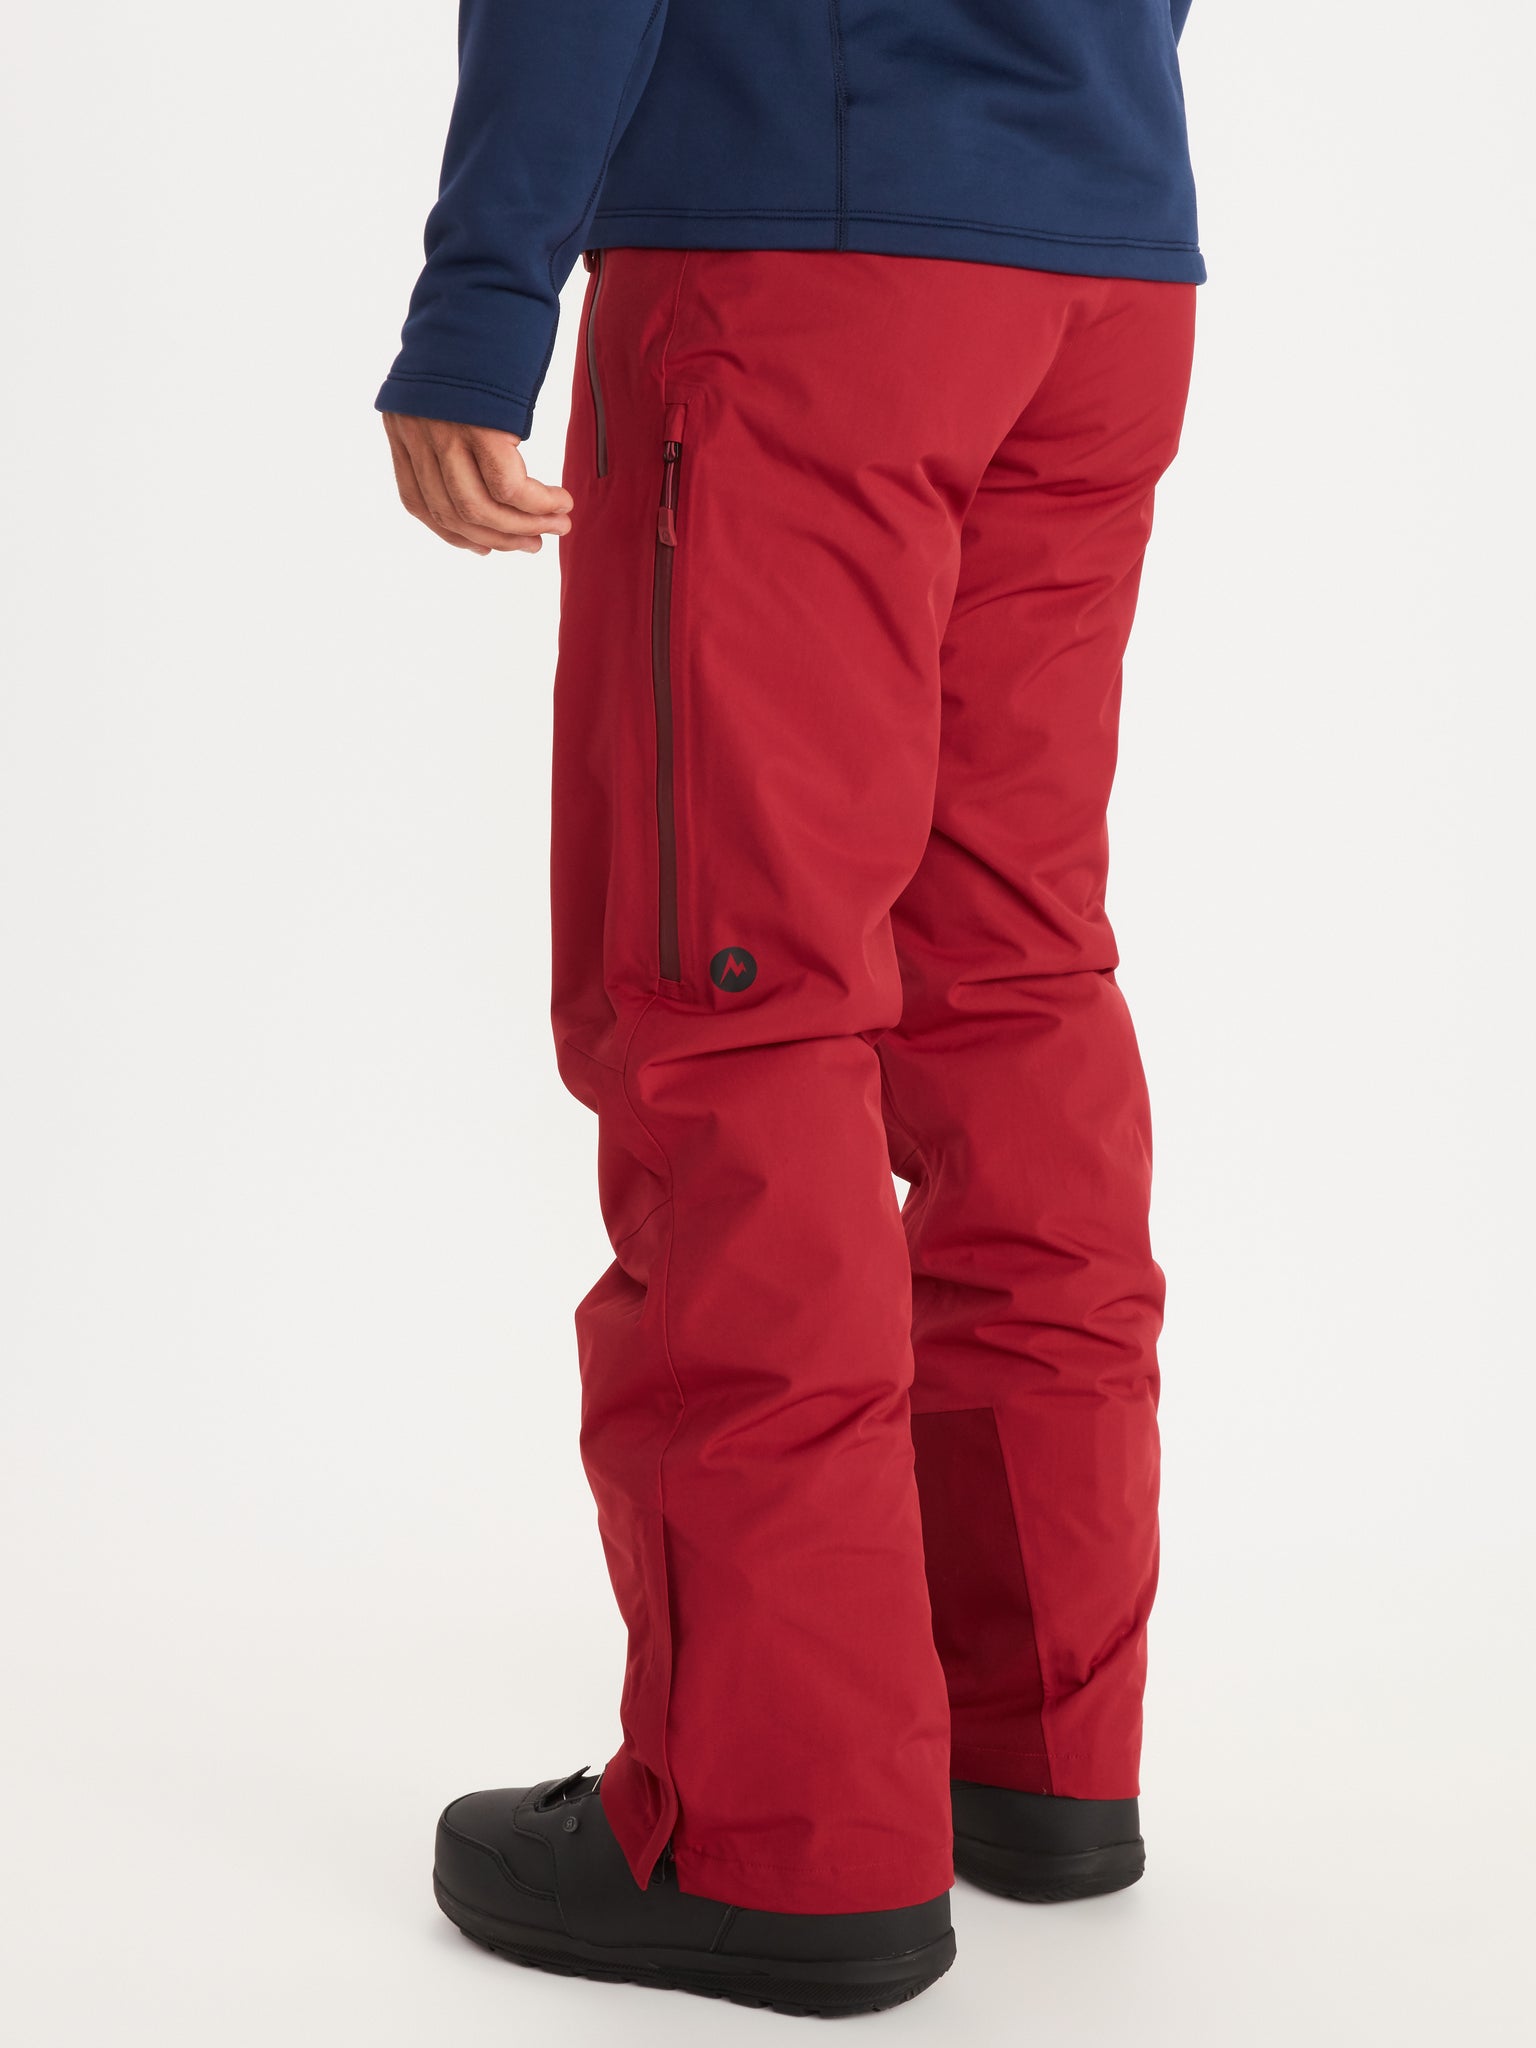 Marmot Refuge Pant - Men's  Up to 64% Off w/ Free Shipping and Handling